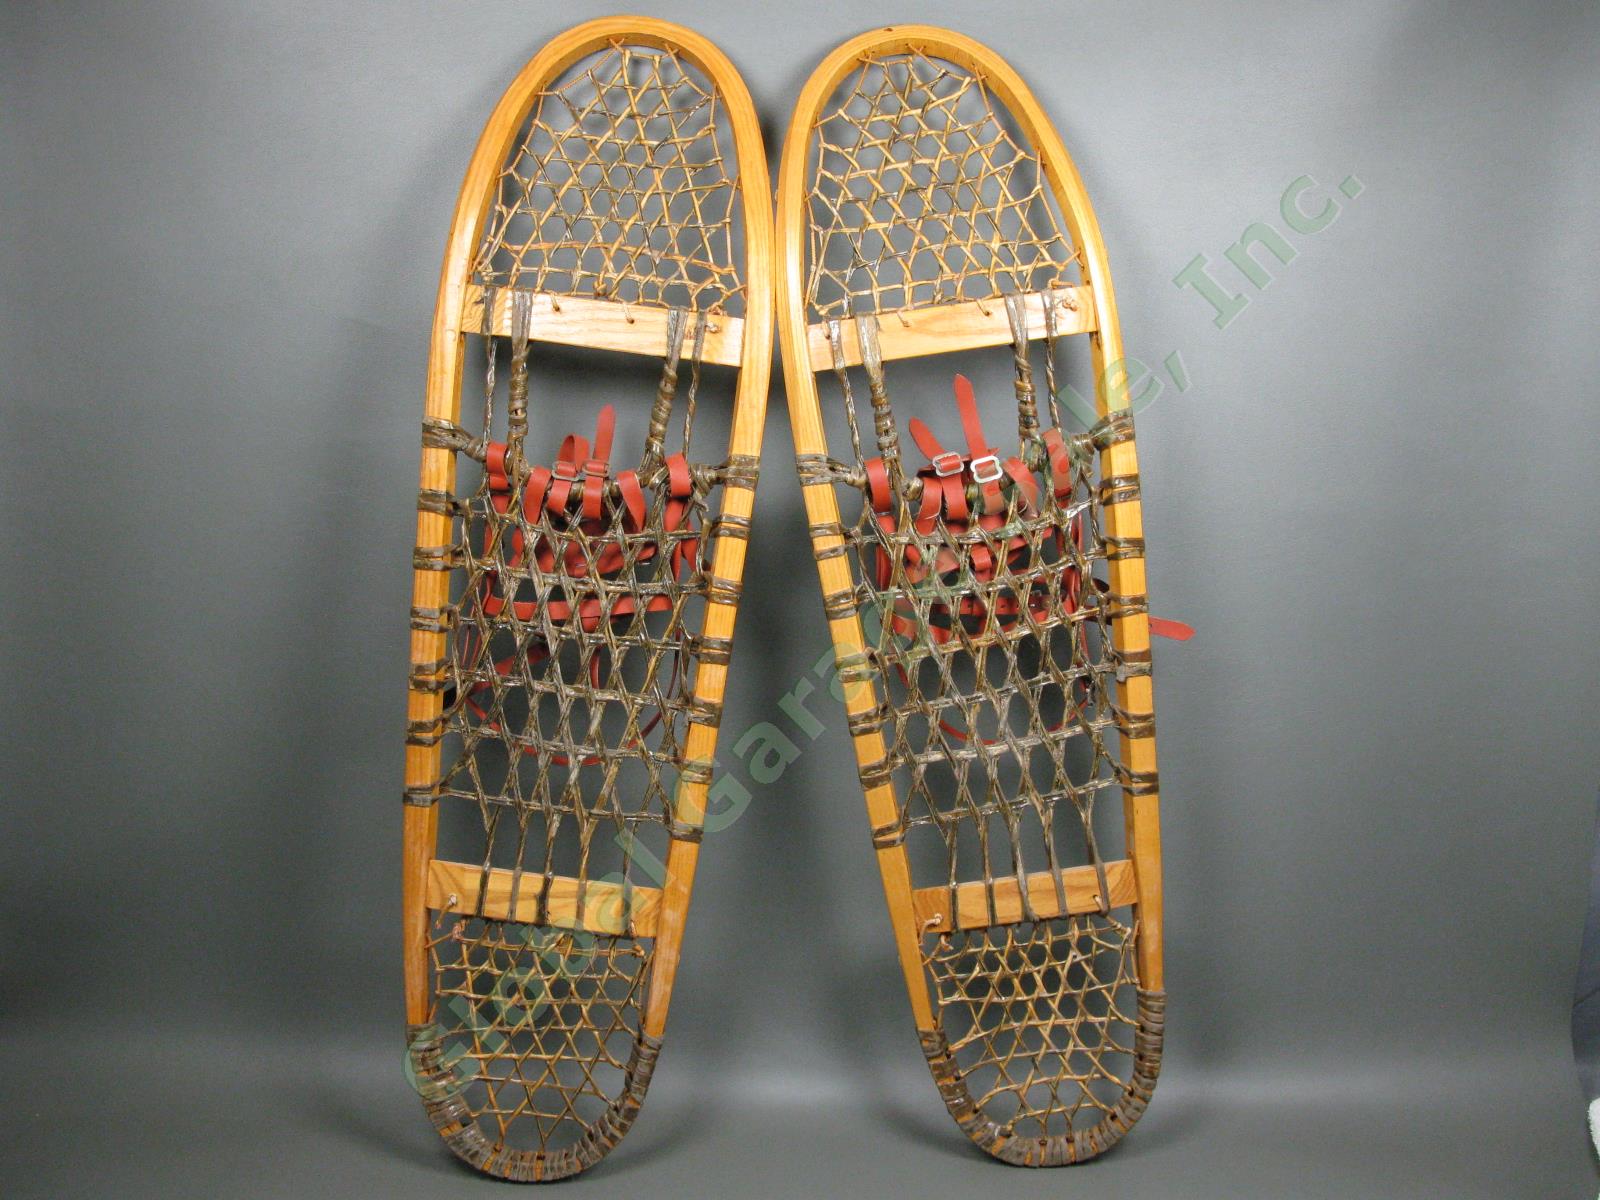 Vintage Viking Wooden Snowshoes 10"x36" Cadillac Michigan Cabin Decor MINT COND 1